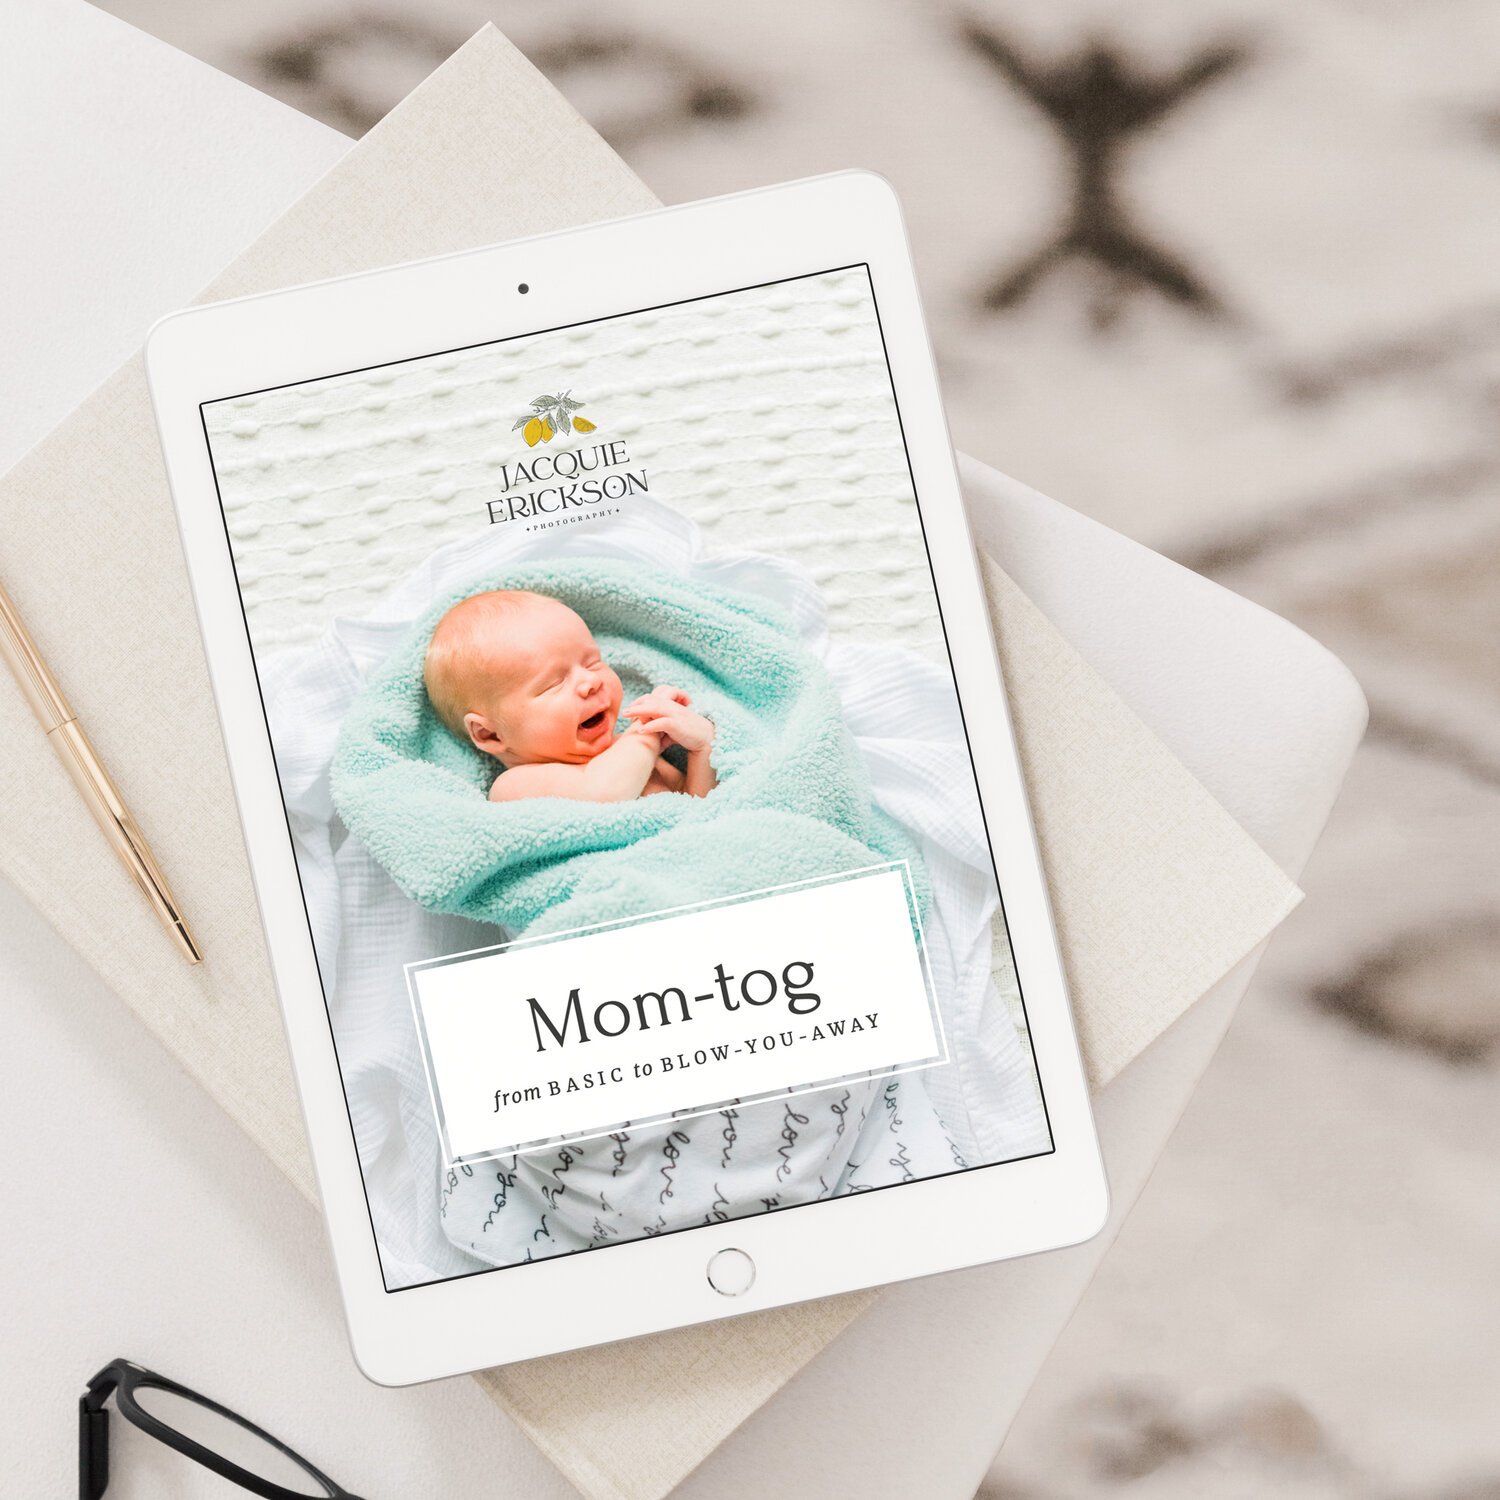  An iPad is open to Jacquie Erickson’s Mom-Tog course, a helpful course for DIY photographers. Client questionnaire Momtog course streamline workflow small business helpers #planoly #dubsado #pixiset #tailwind #theunburdenstudio #diyphotographers 